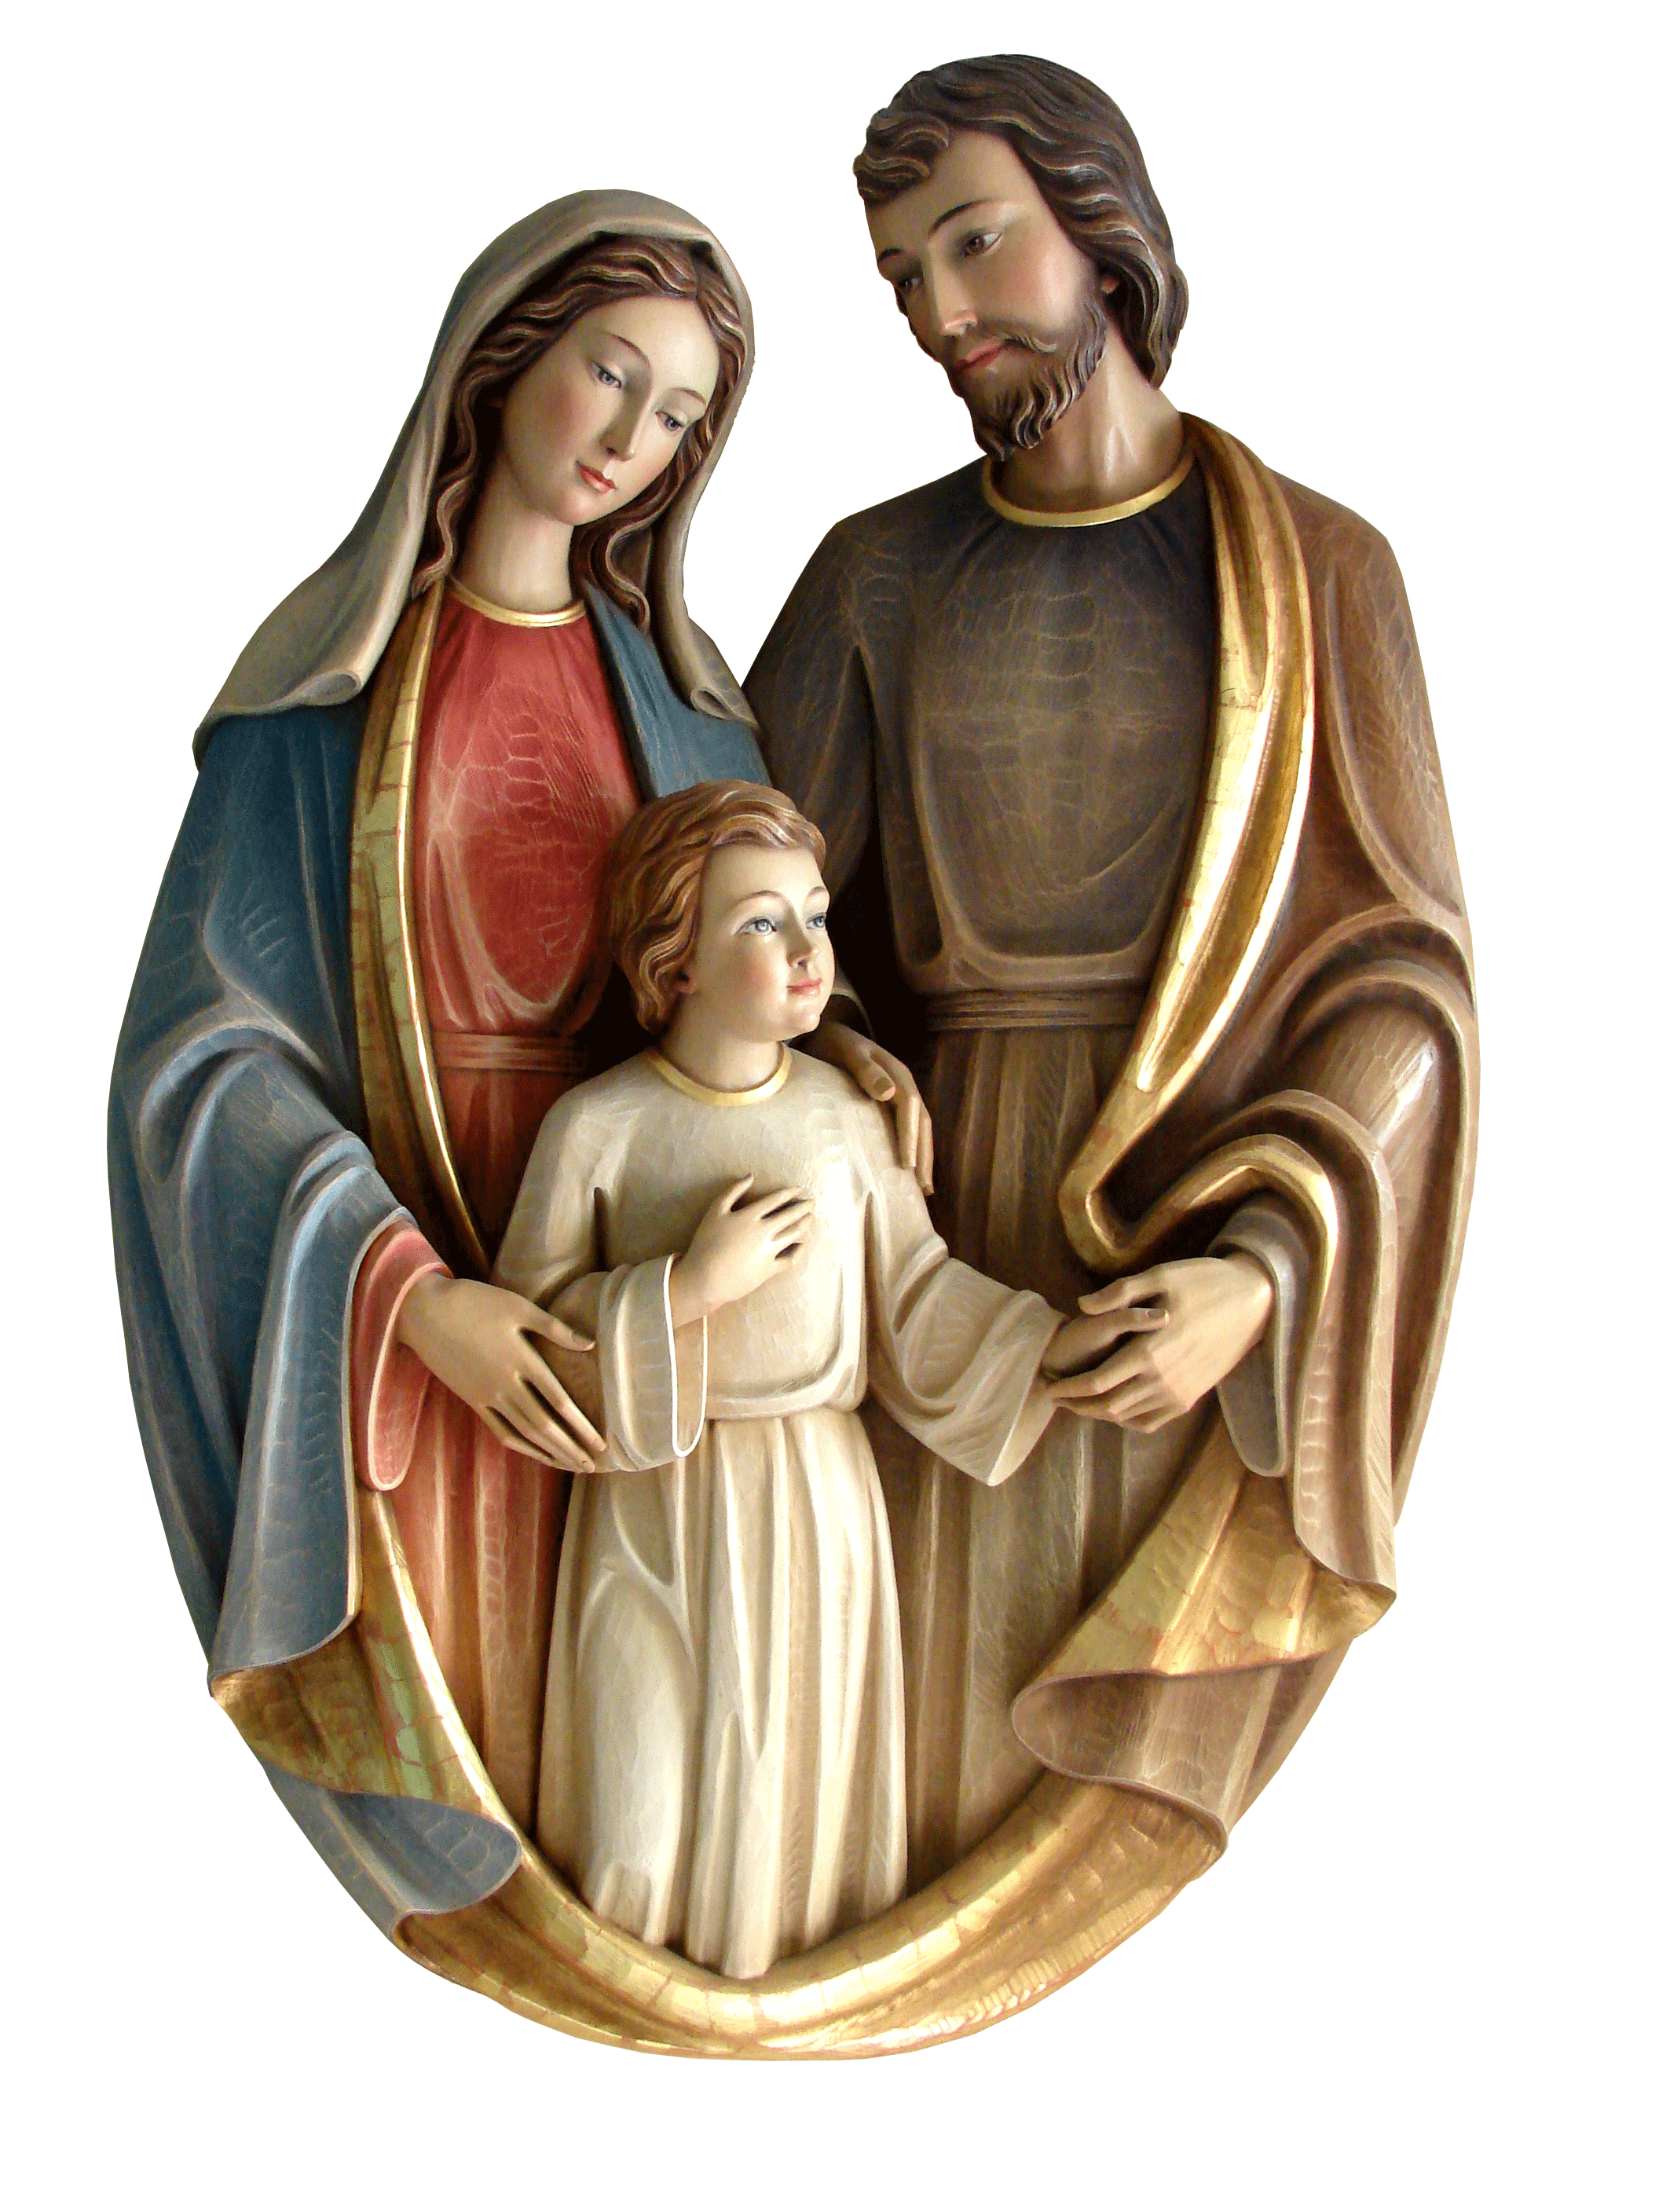 Sunday 28th December 2014 Feast Of The Holy Family St Andrew's RC